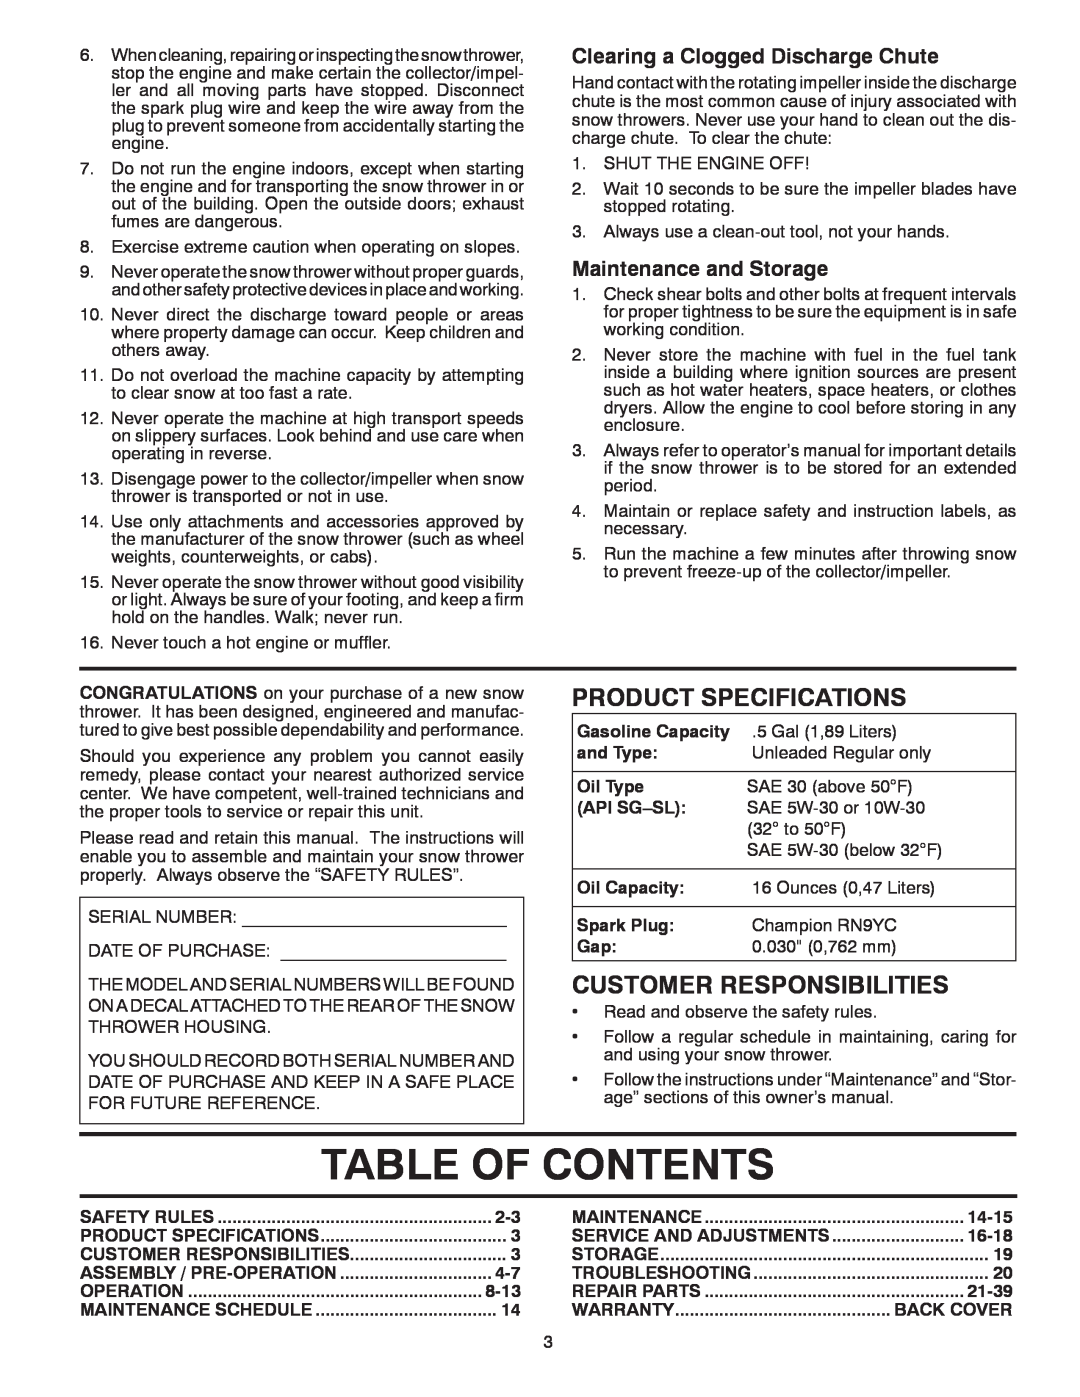 Poulan 435551 Table Of Contents, Product Specifications, Customer Responsibilities, Clearing a Clogged Discharge Chute 